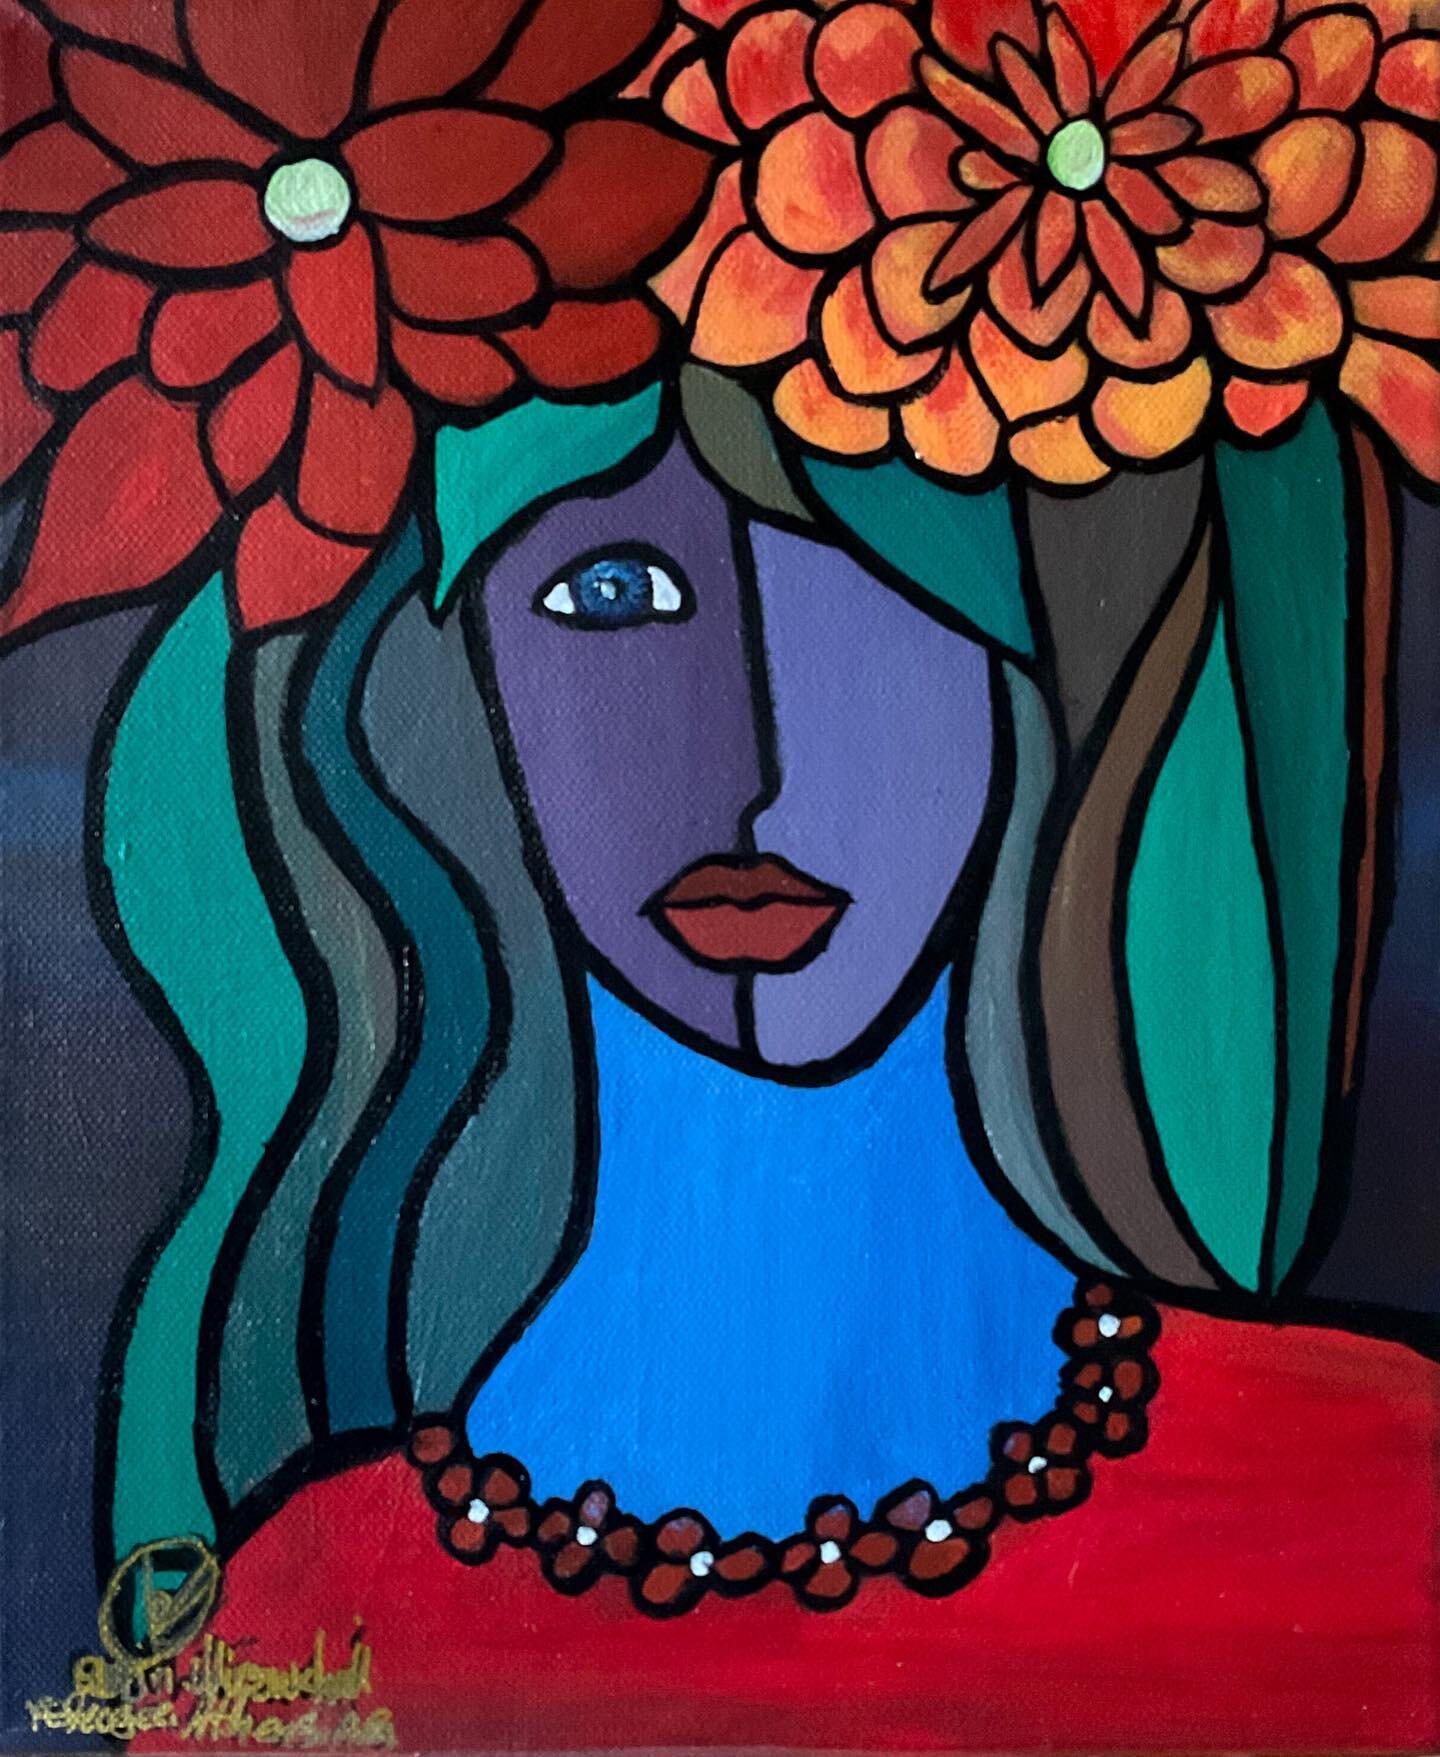 From the mind of women flowers bloom 

Acrylic 
by Banin @banart2020